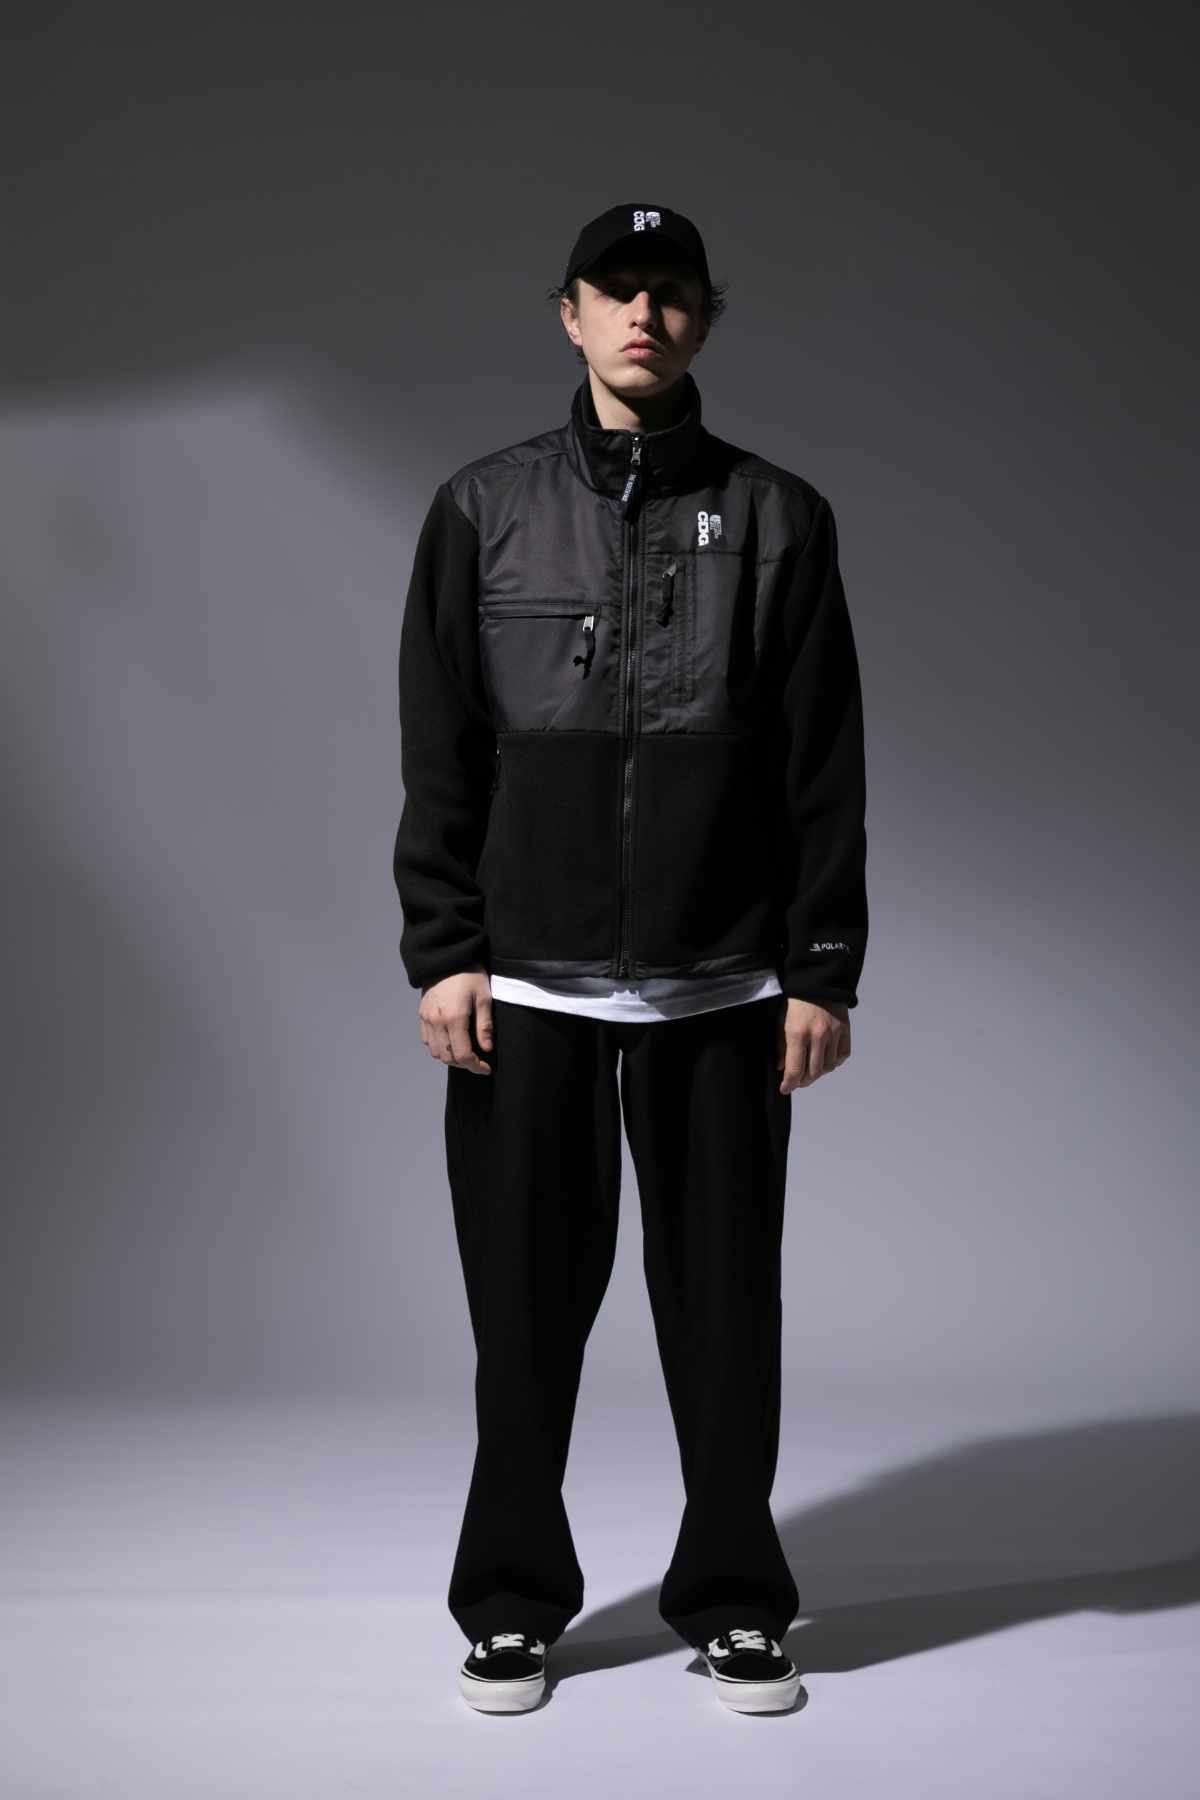 A male model wears the CDG x The North Face collaborative black hat and zip-up jacket